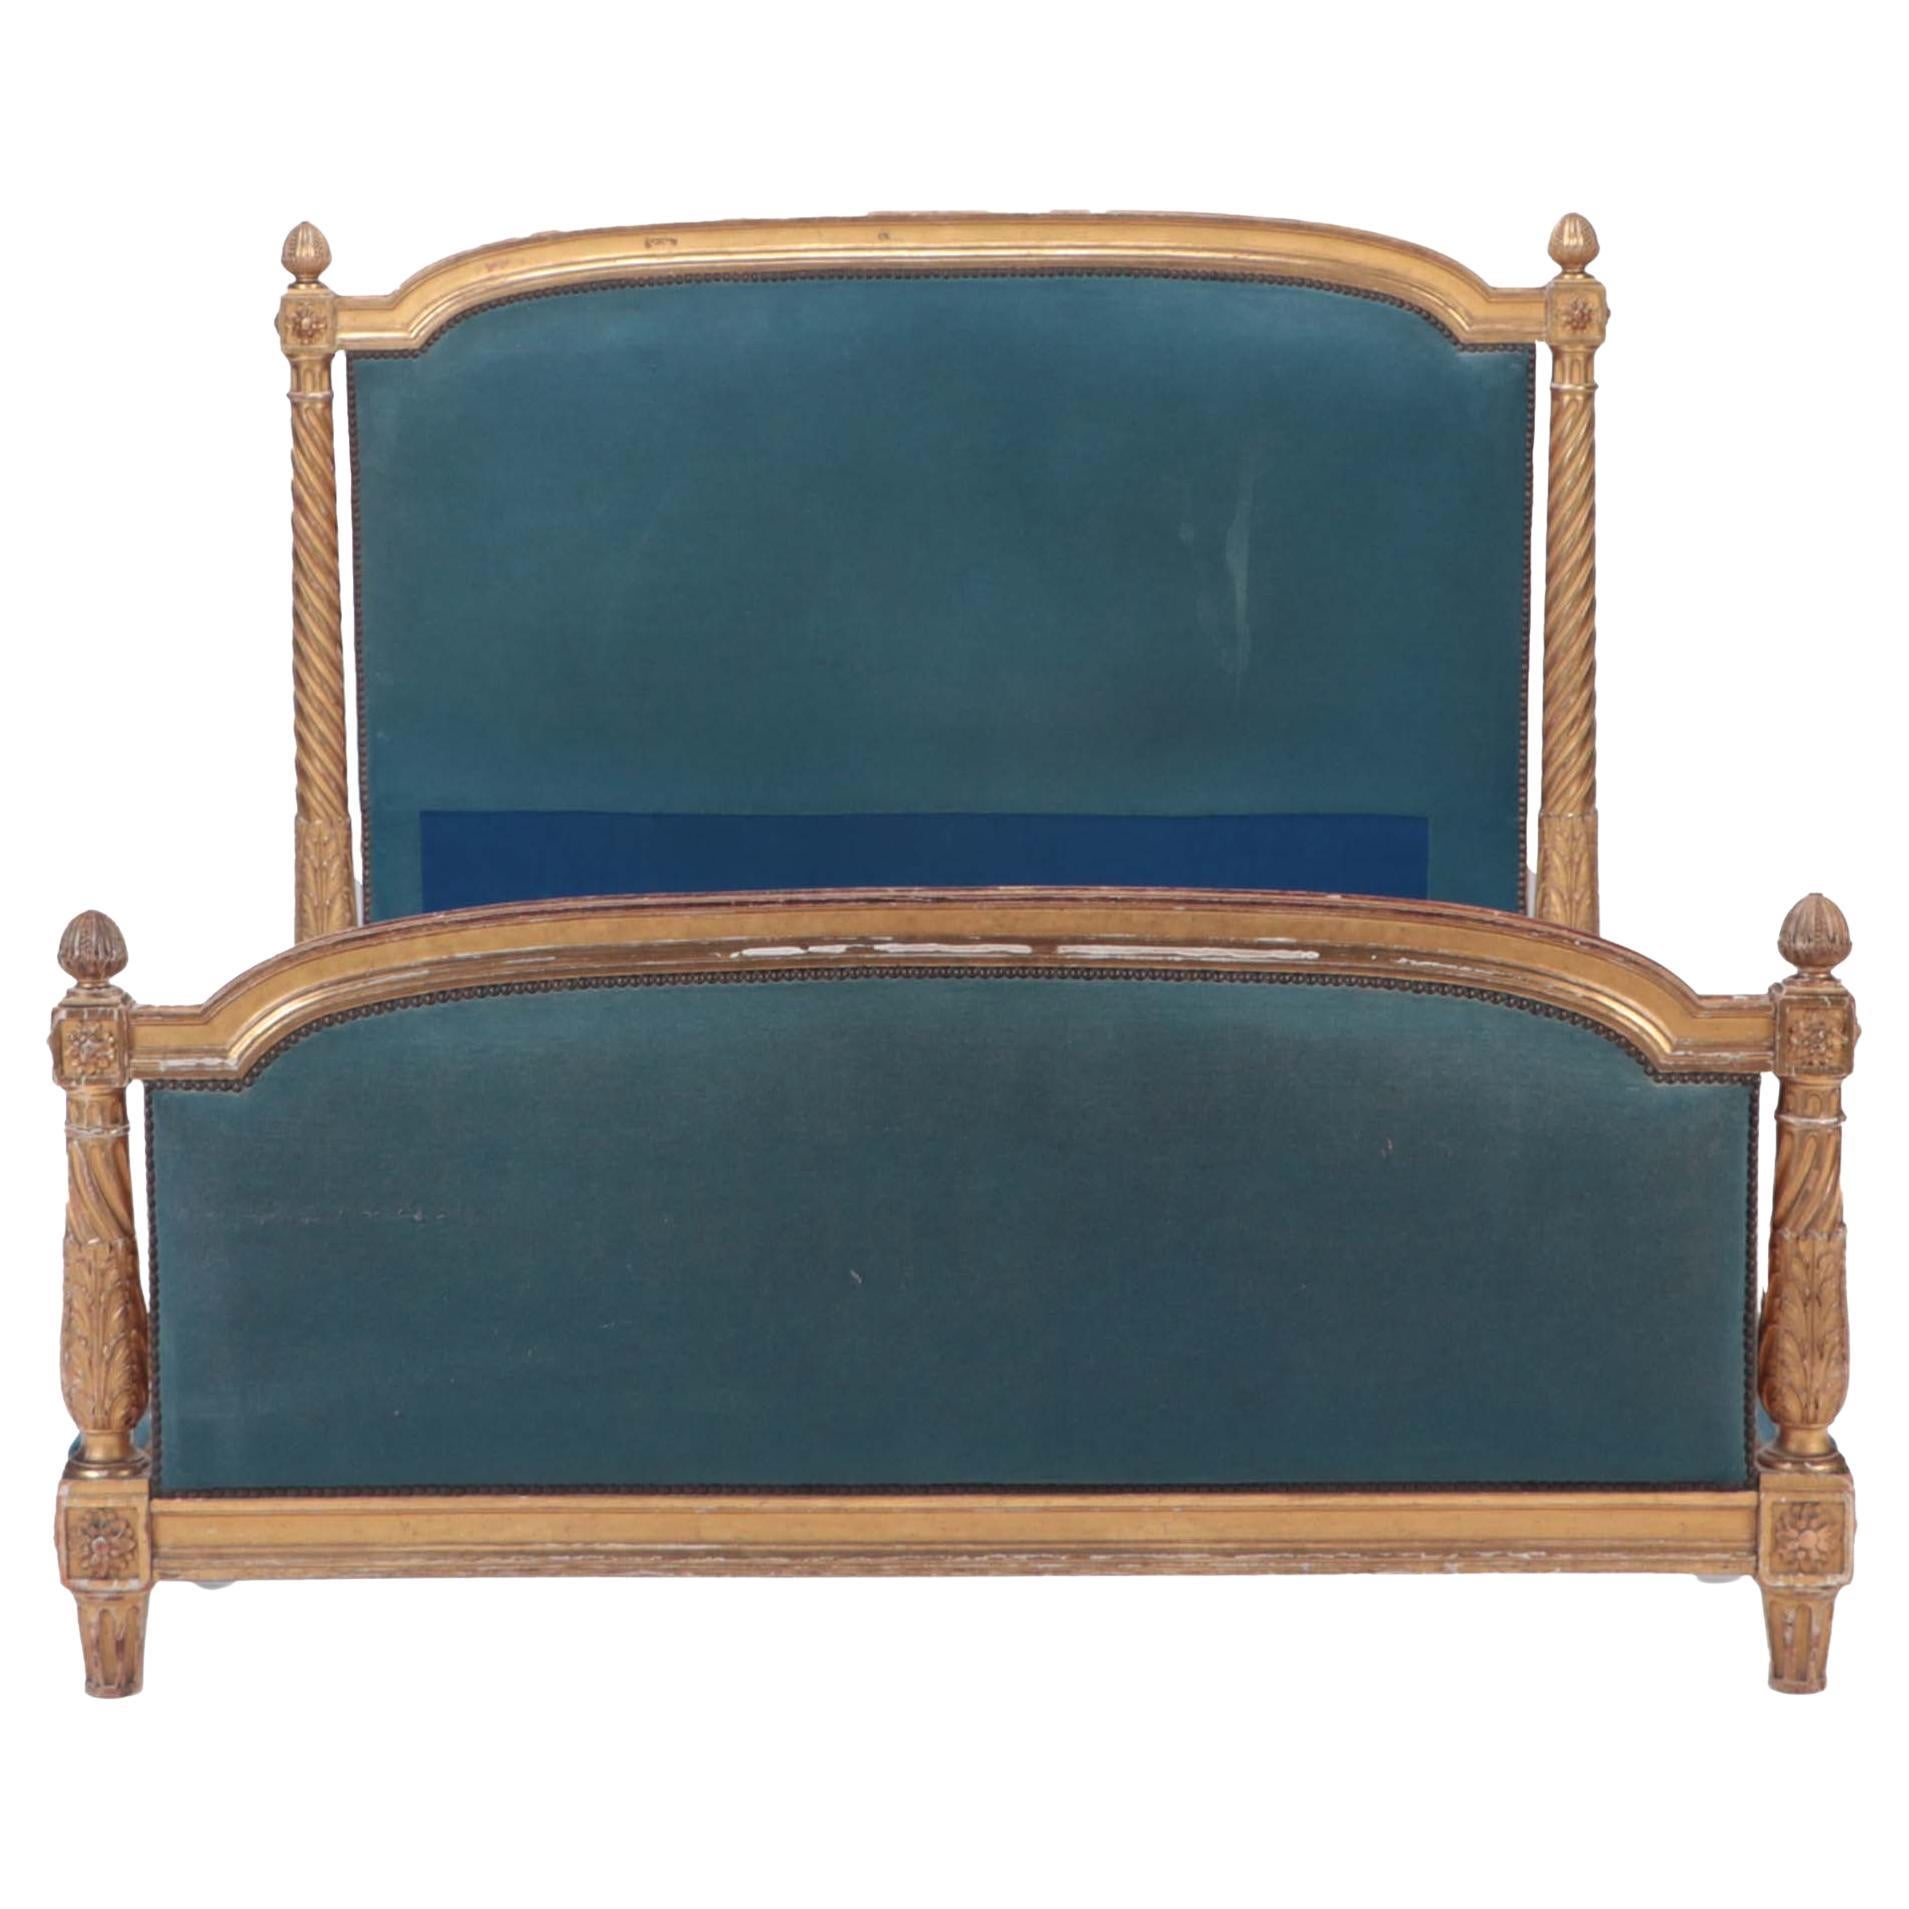 French Louis XVI Style Giltwood Bed, C 1880